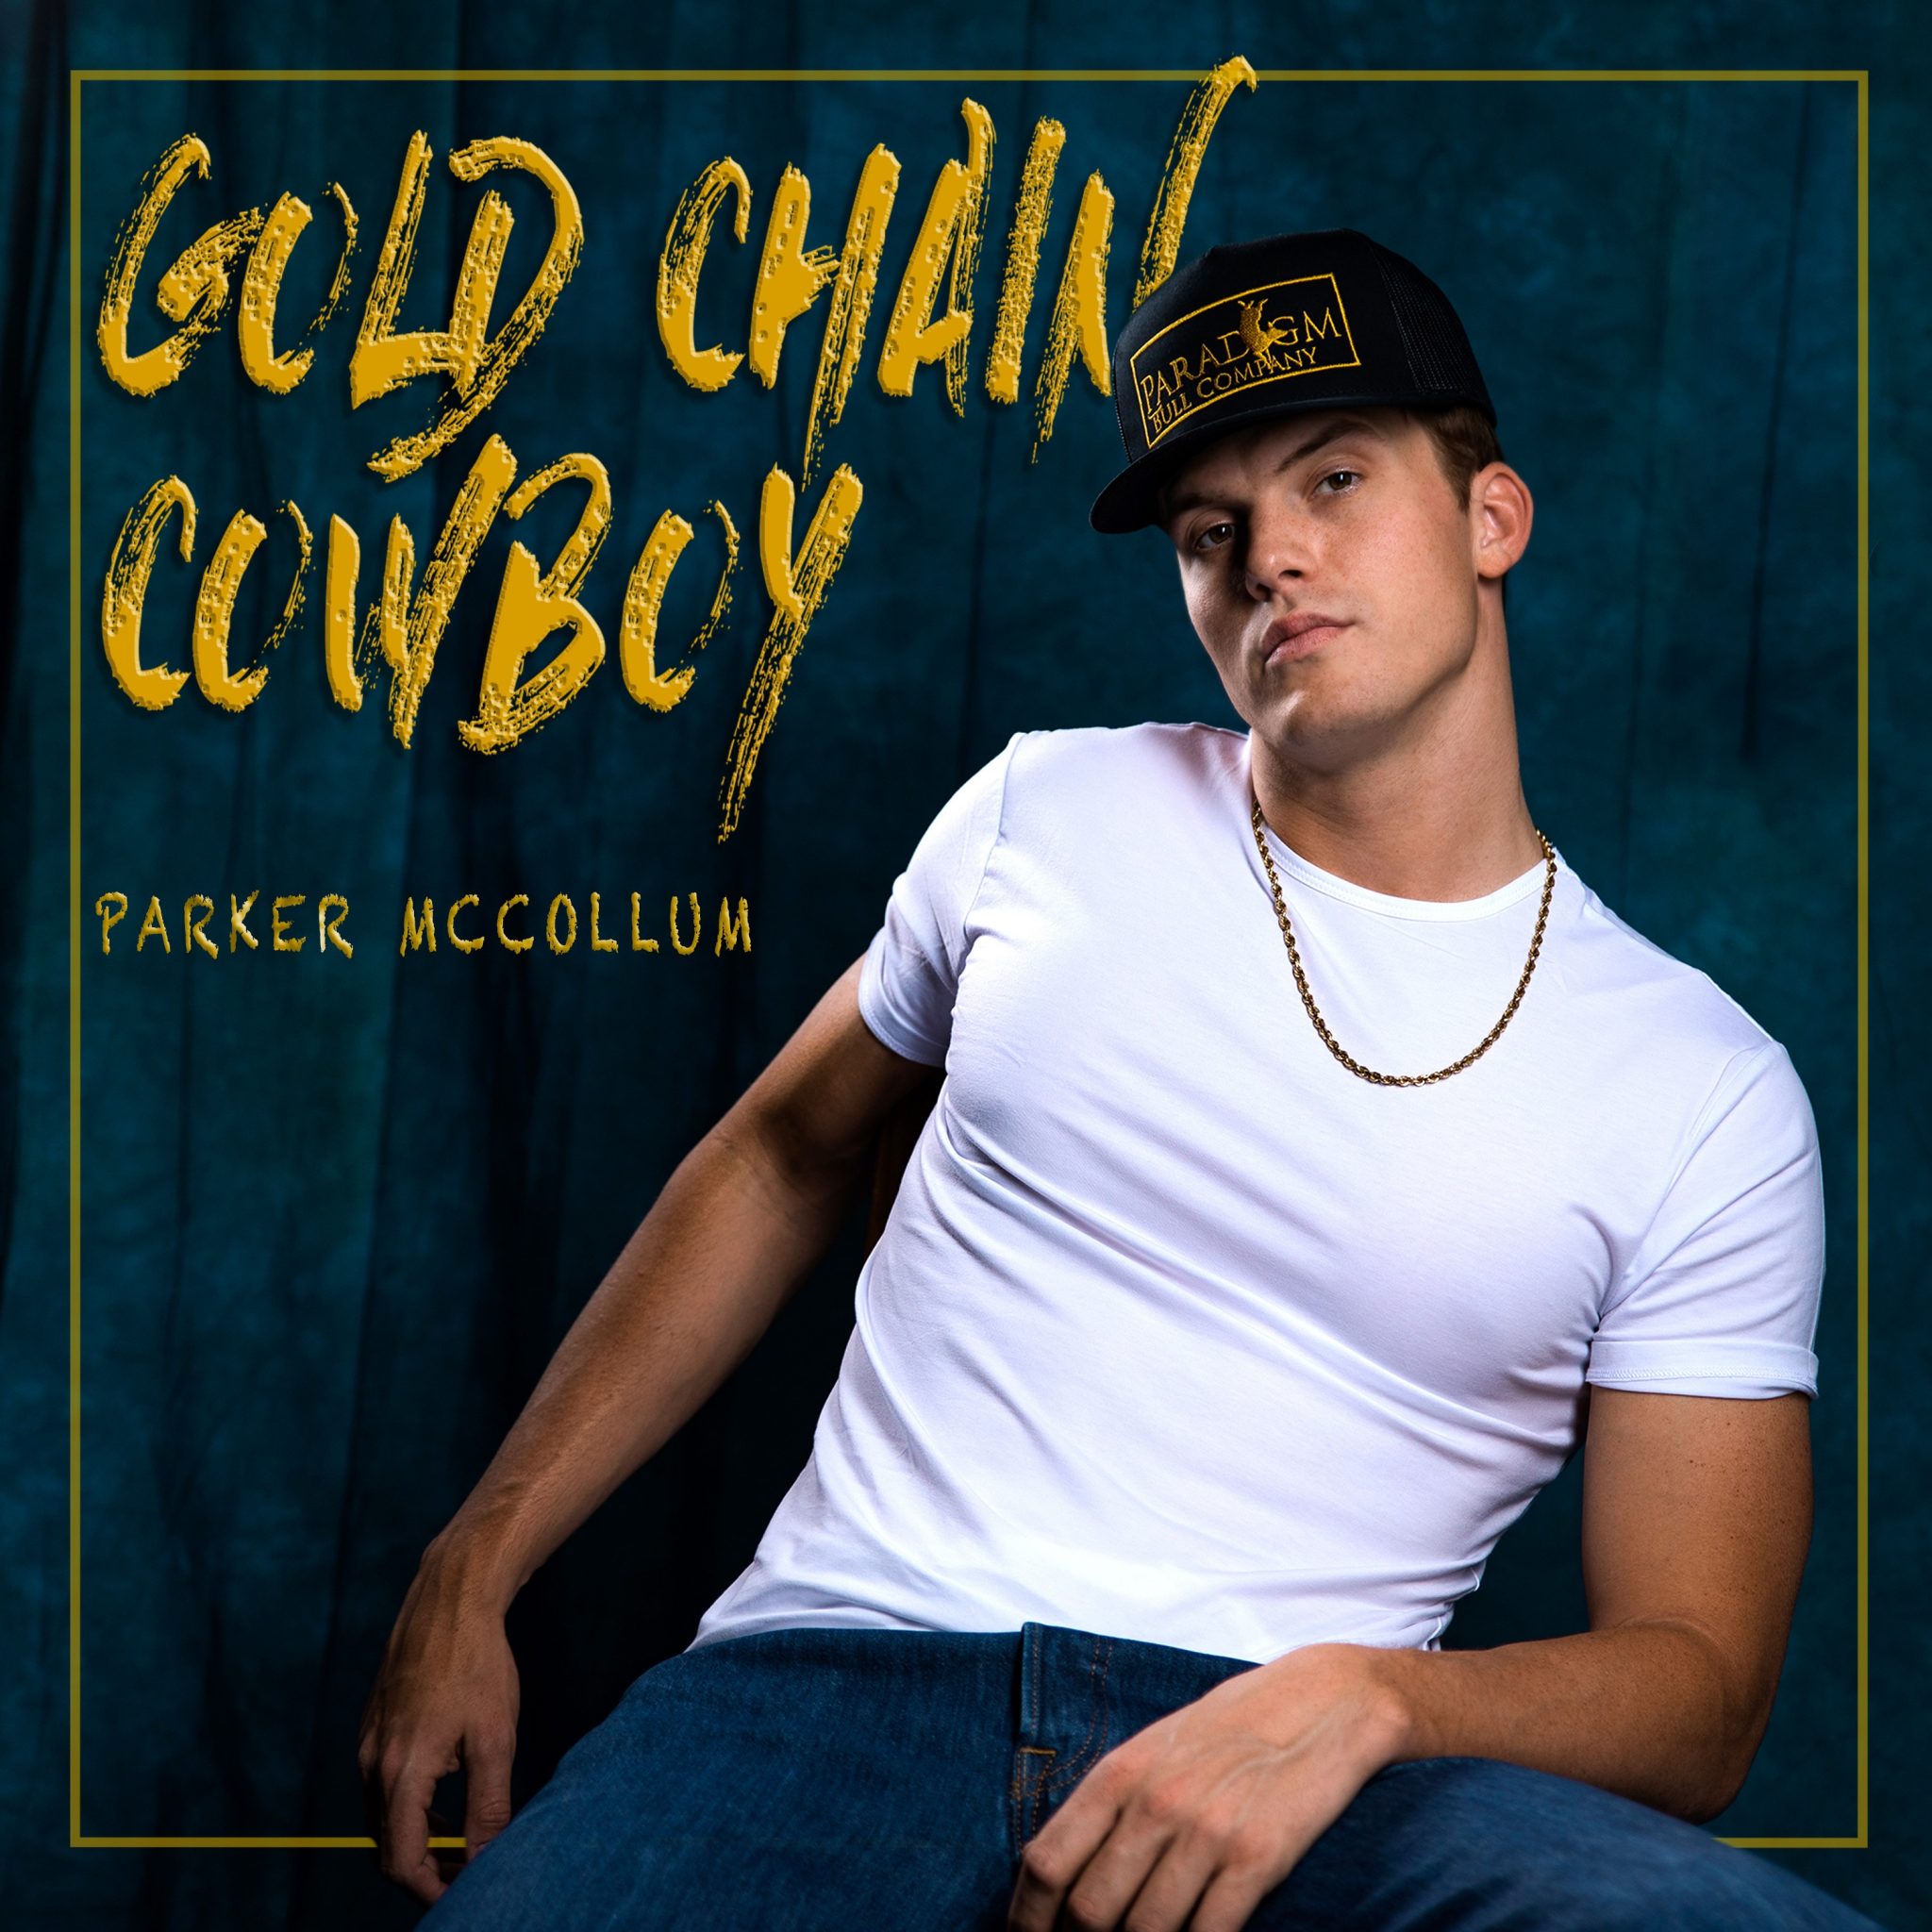 Parker McCollum His Own Path with ‘Gold Chain Cowboy’ Sounds